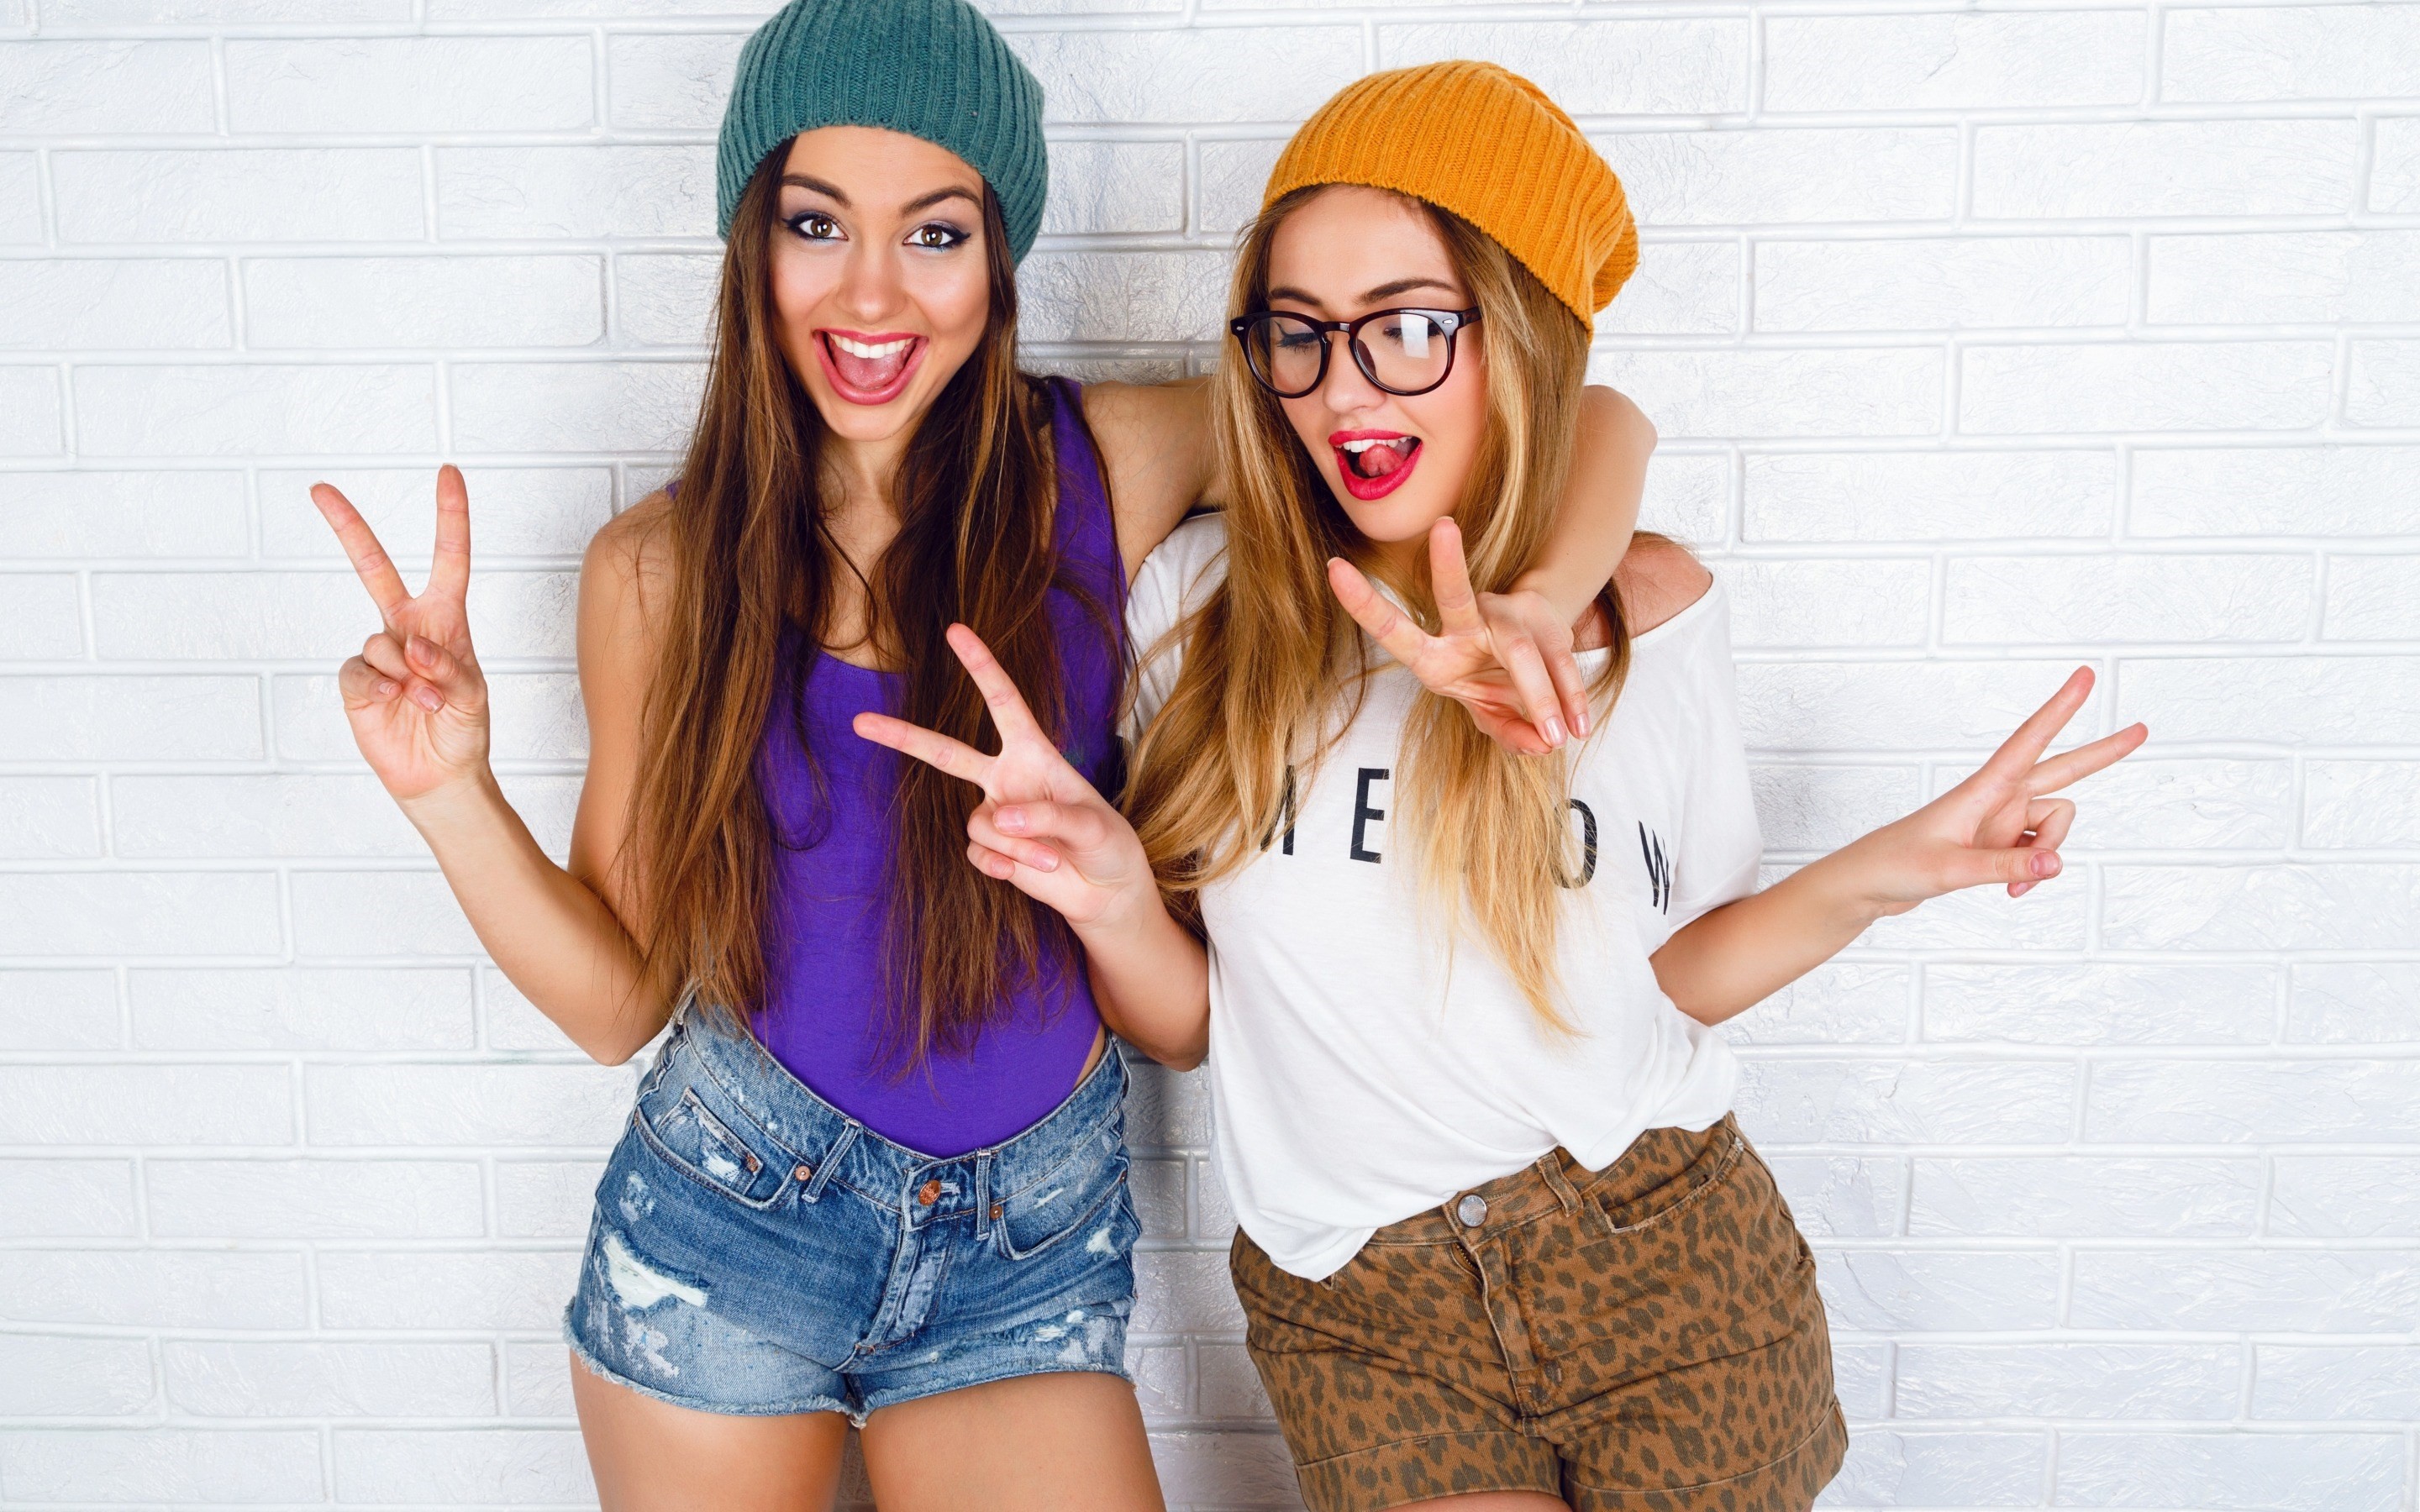 Women Blonde Open Mouth Women With Glasses Wall Brunette Tongue Out Wool Cap Two Women Hand Gesture 2880x1800